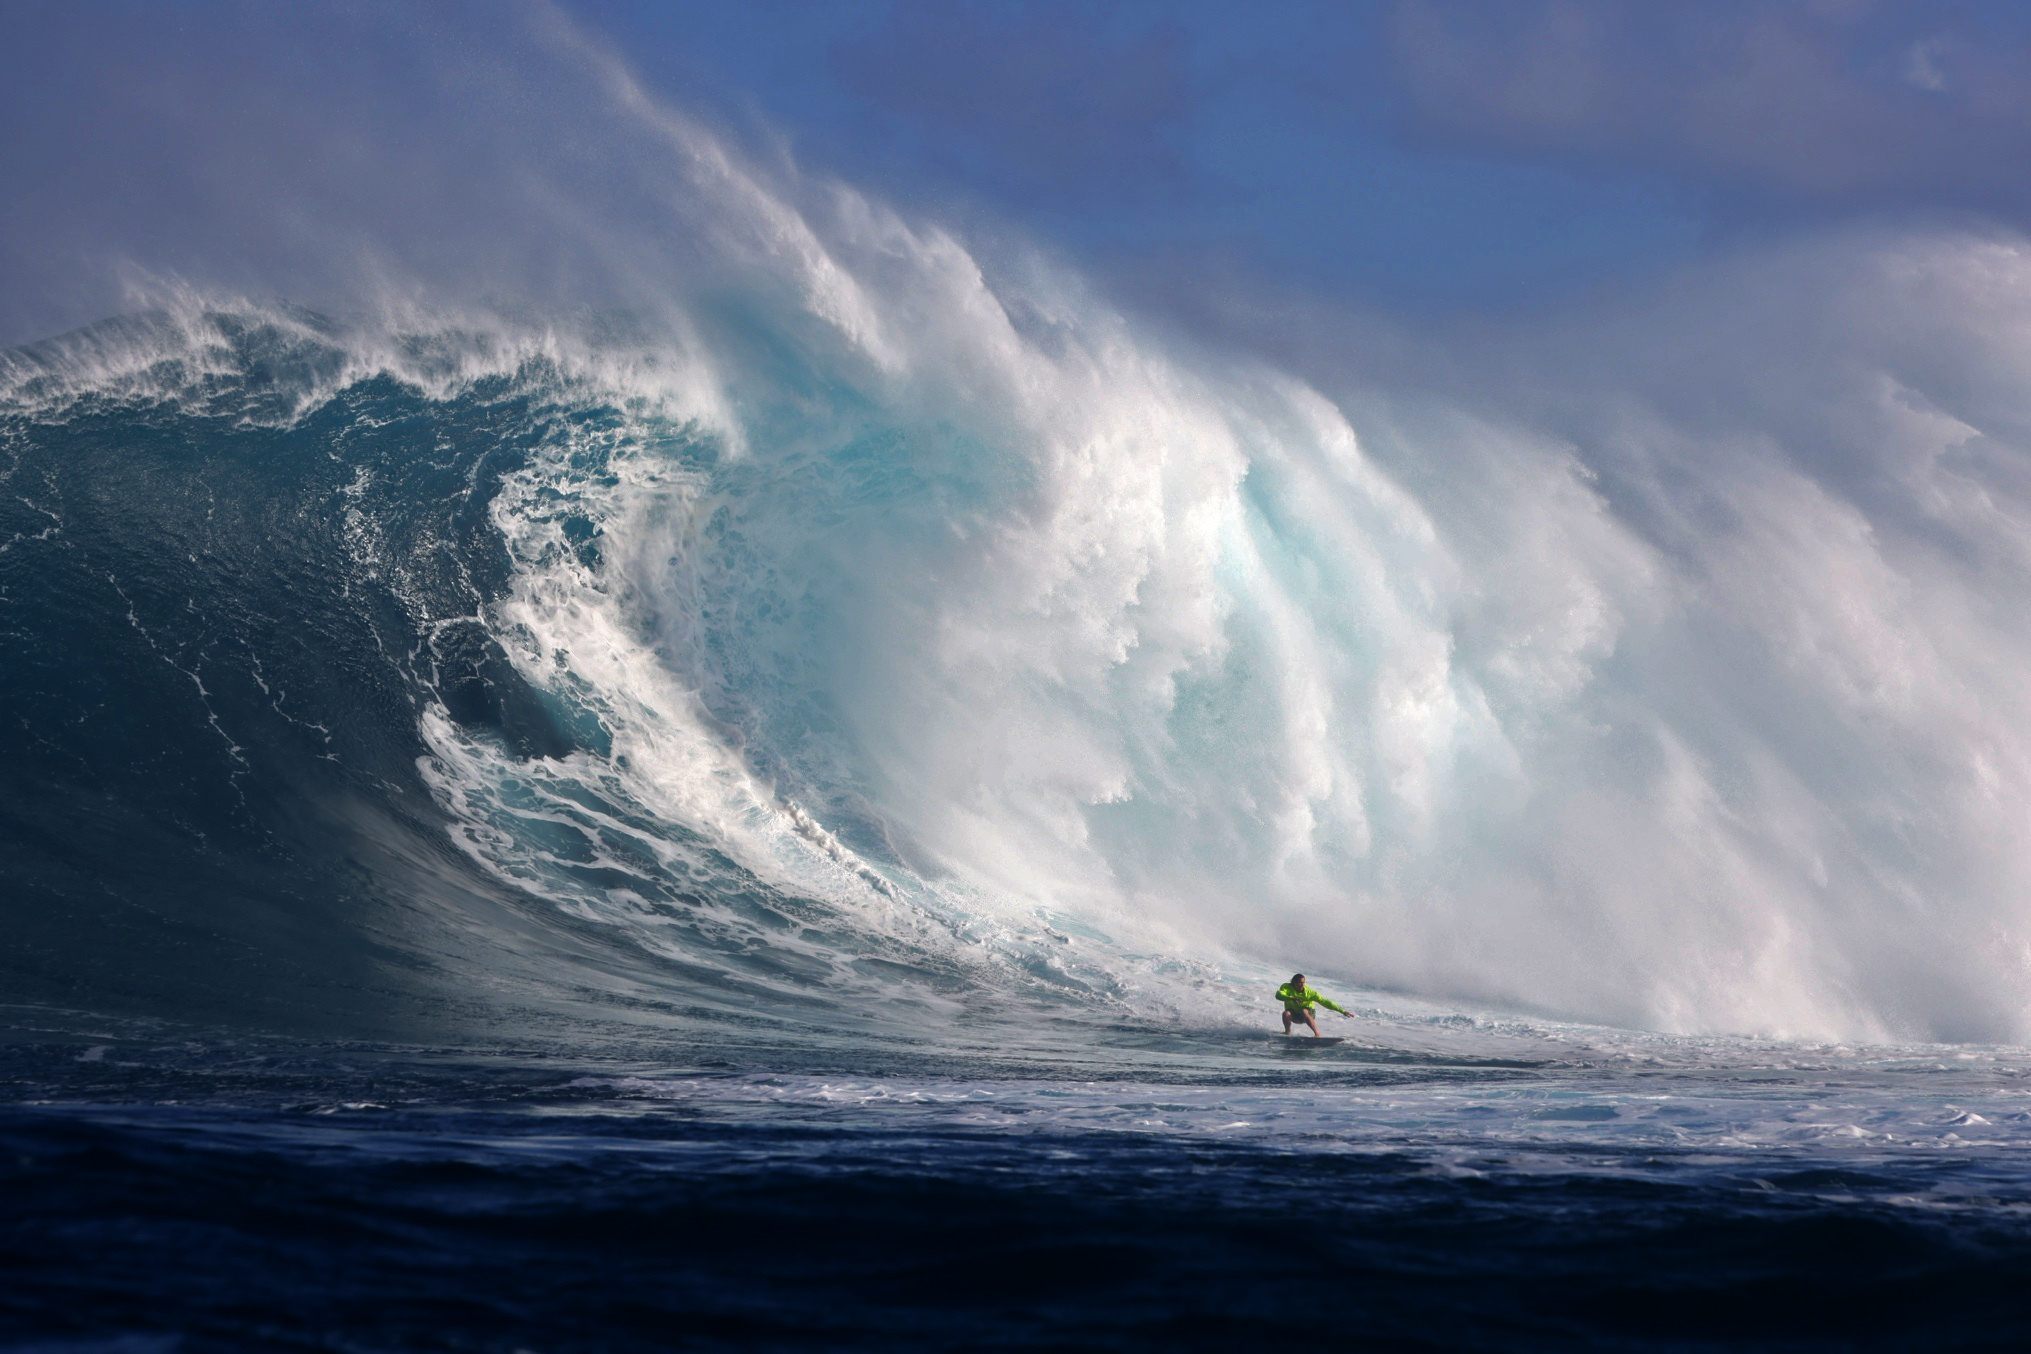 PHOTOS: High Surf Warning extended, daring surfers take on large swells at  Waimea